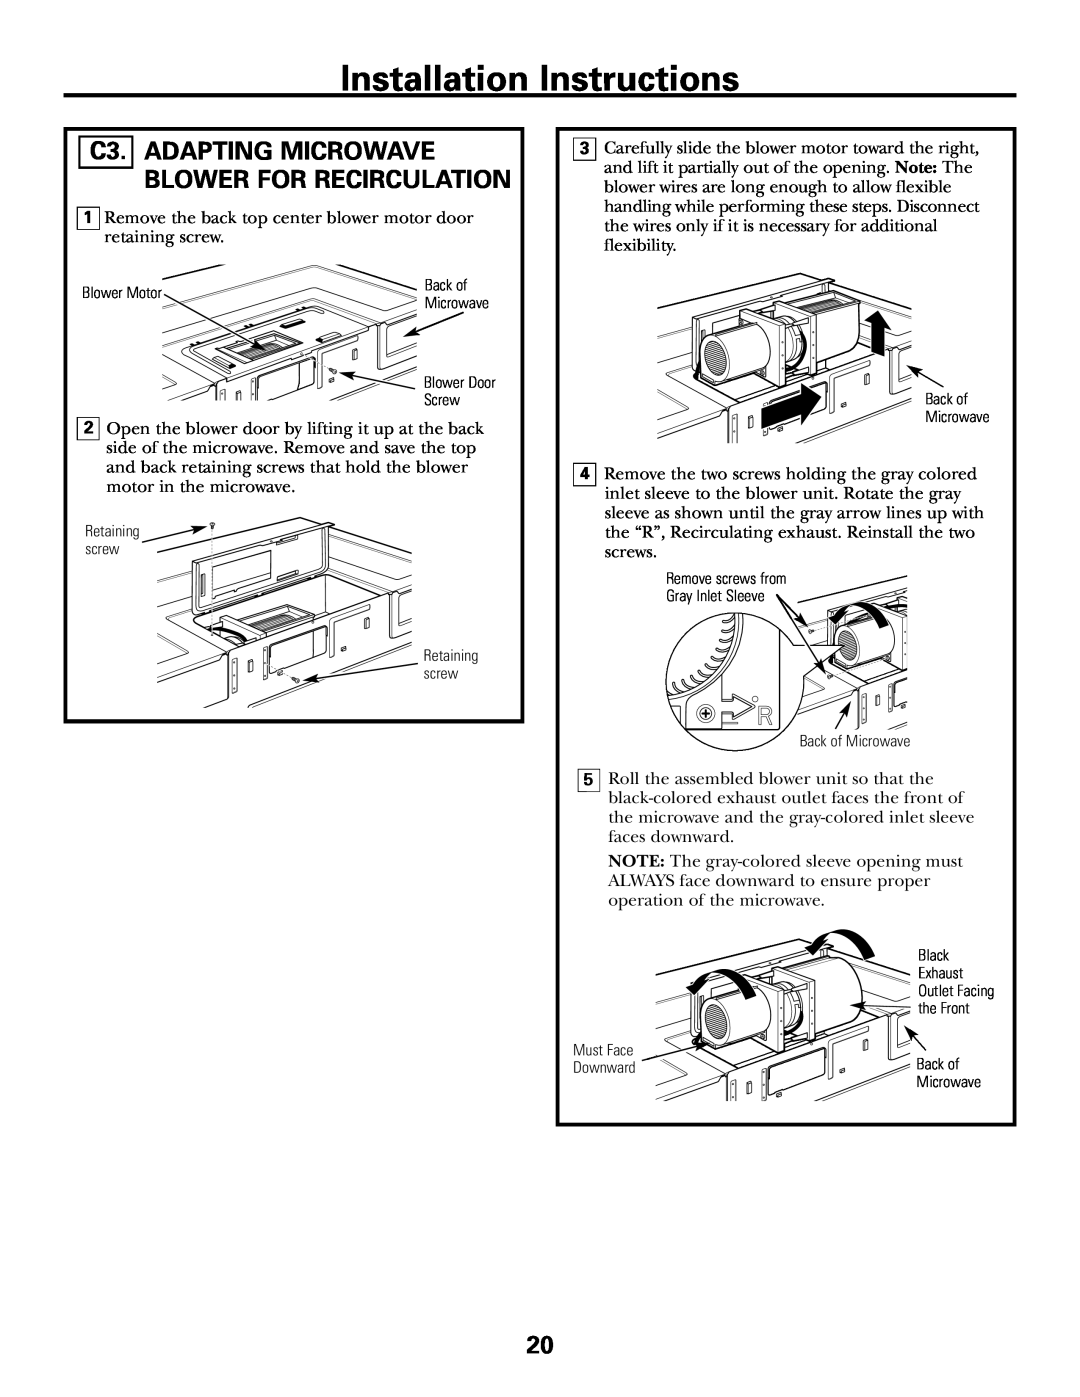 GE DE68-02957A, 39-40425 warranty Installation Instructions, C3. ADAPTING MICROWAVE BLOWER FOR RECIRCULATION 